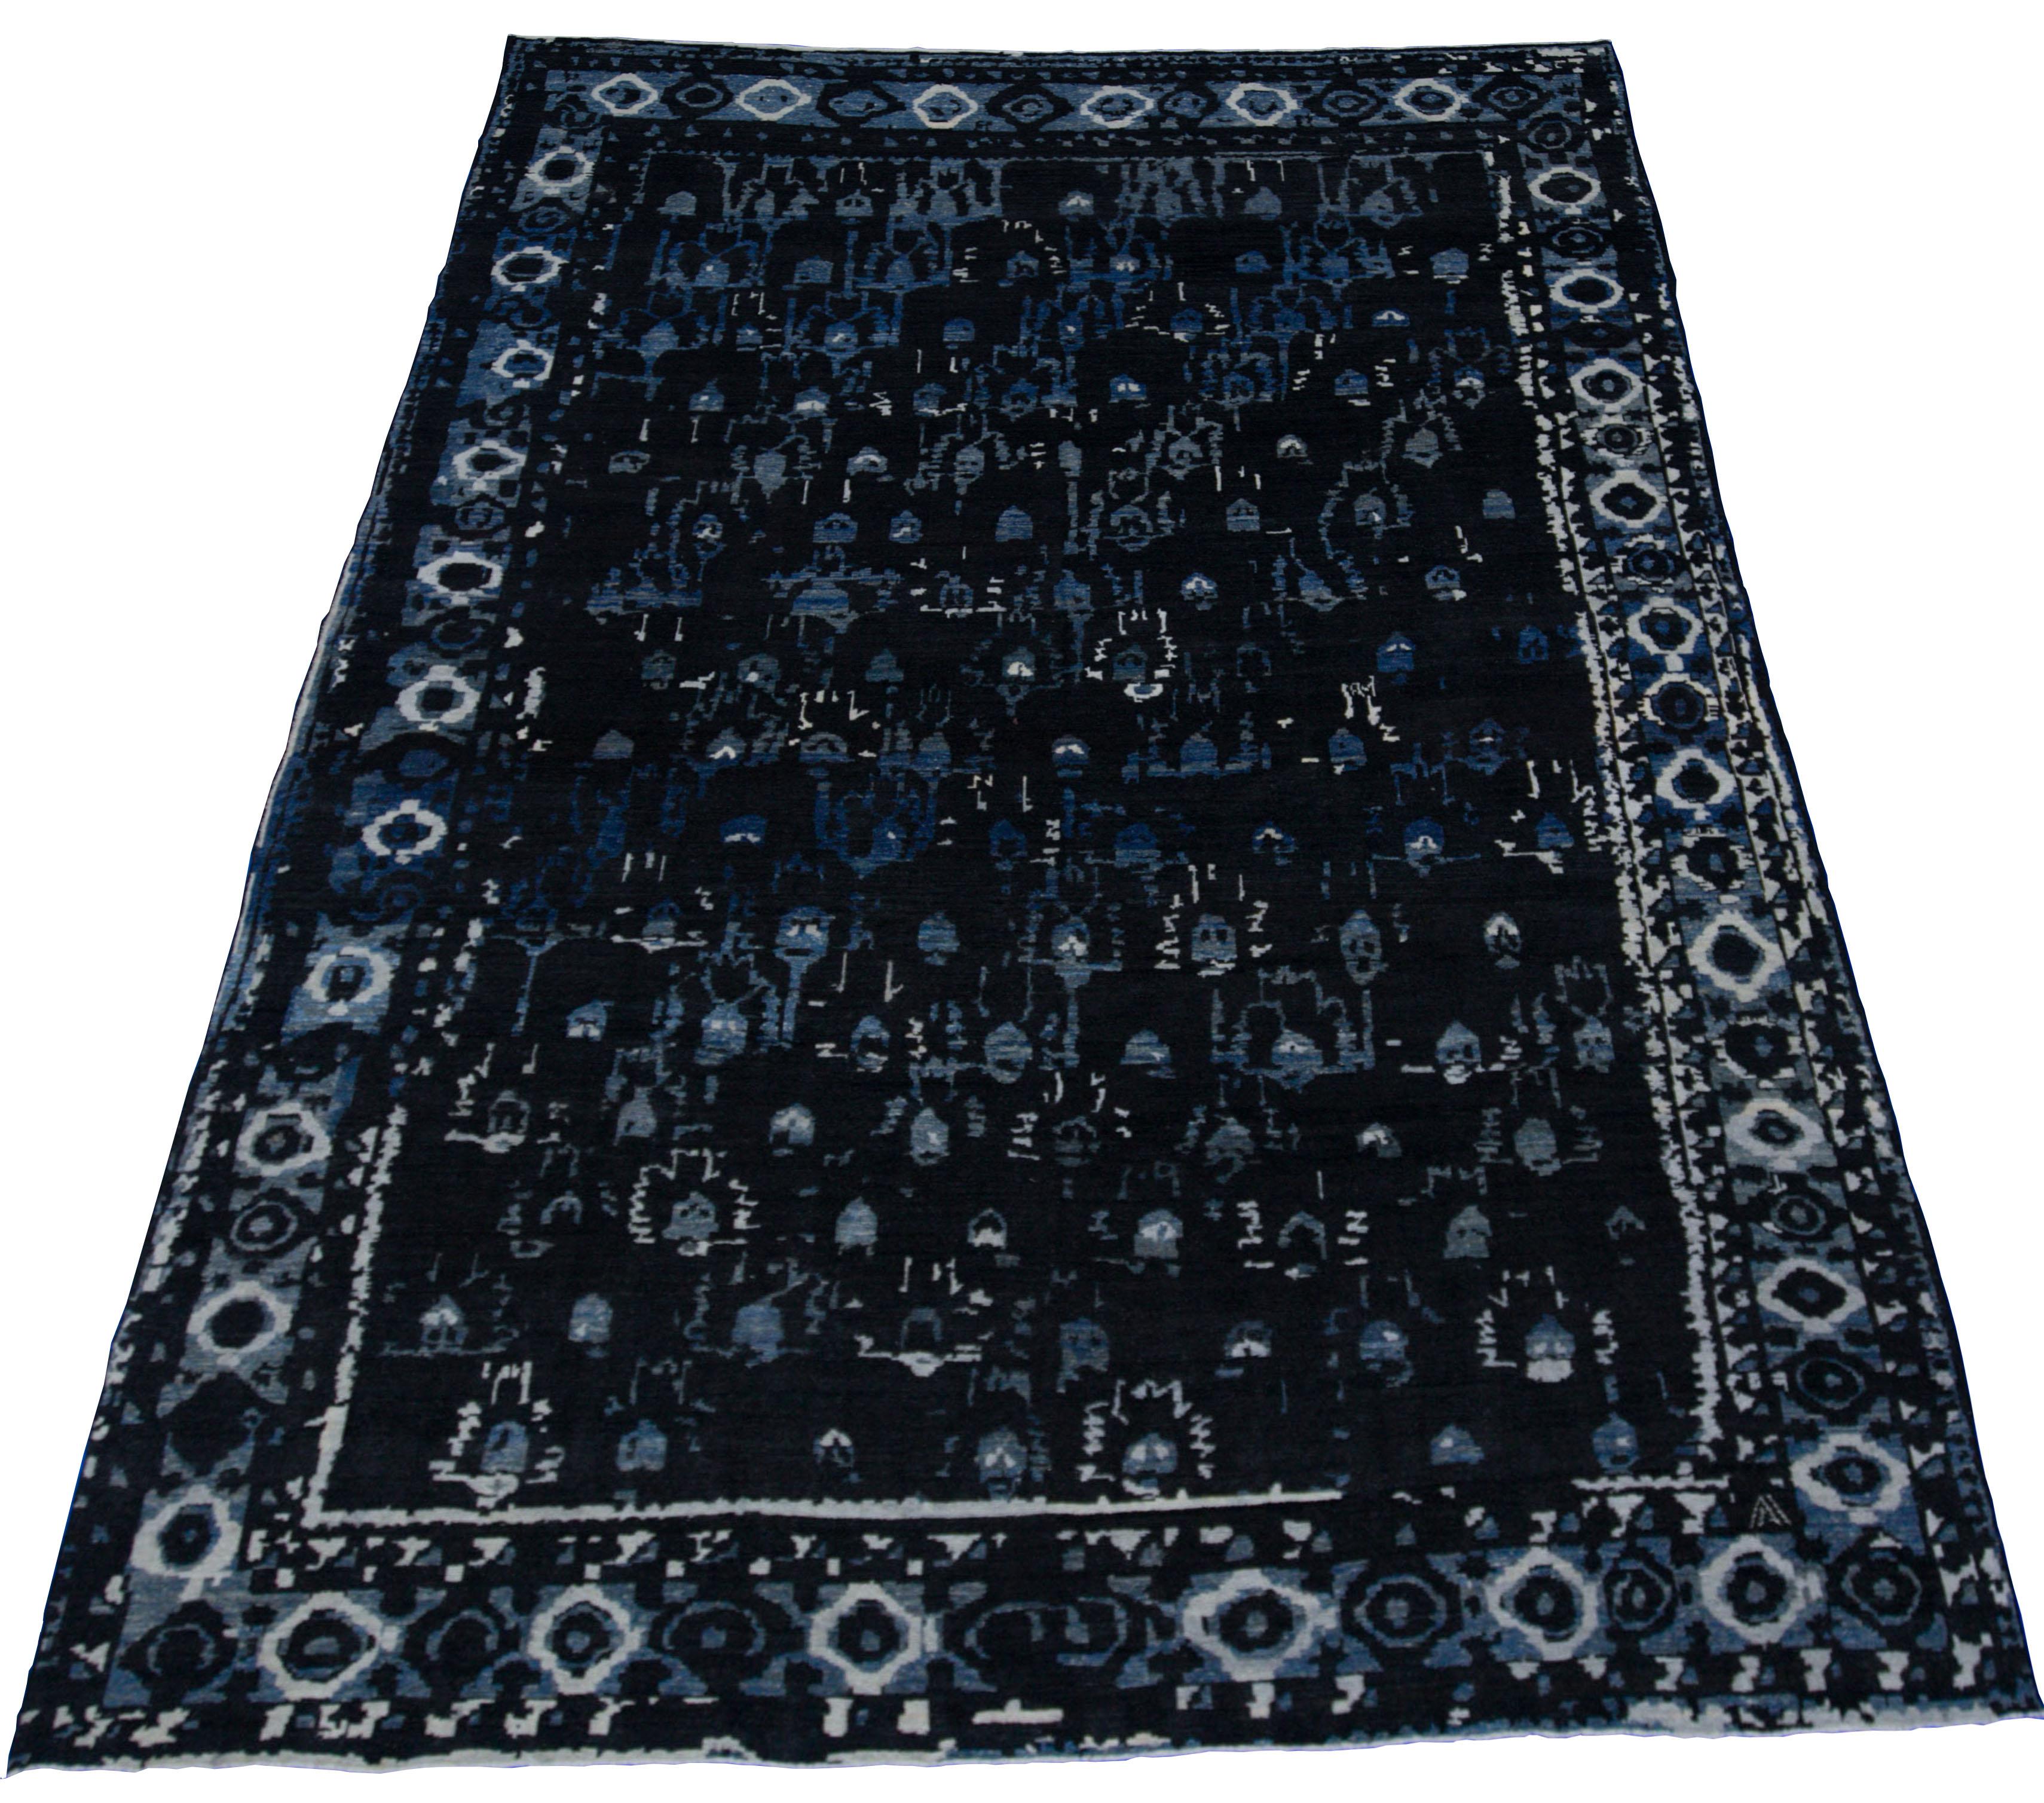 Hand-Woven Modern Turkish Oushak Rug with Unique Black, Blue & White Floral Details For Sale